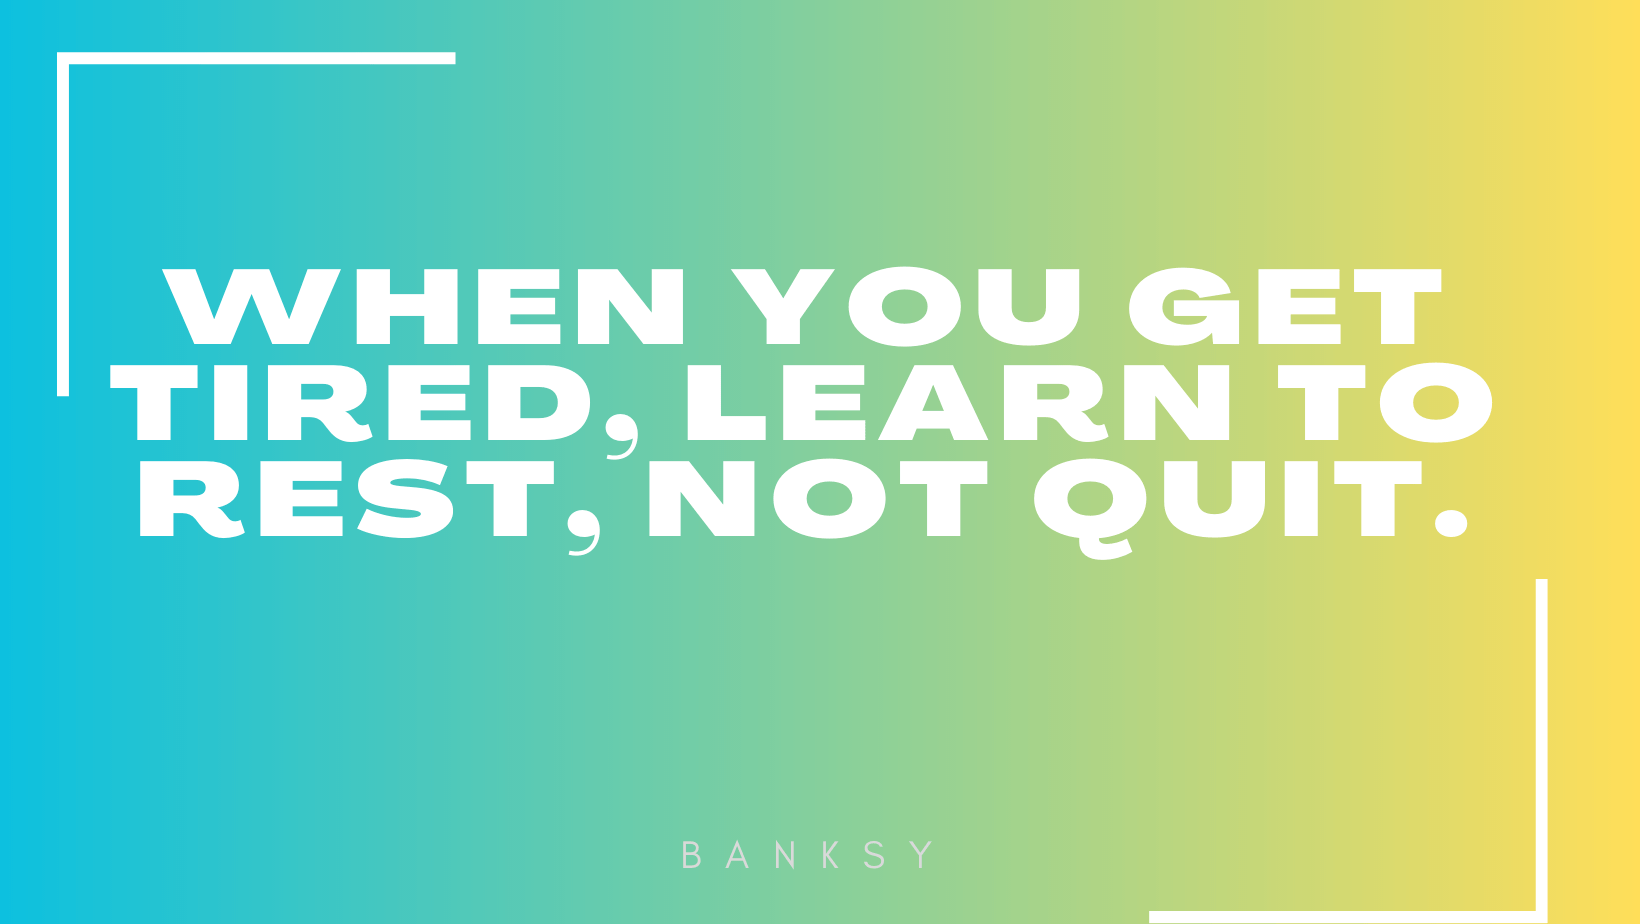 'When you get tired, learn to rest, not quit.'